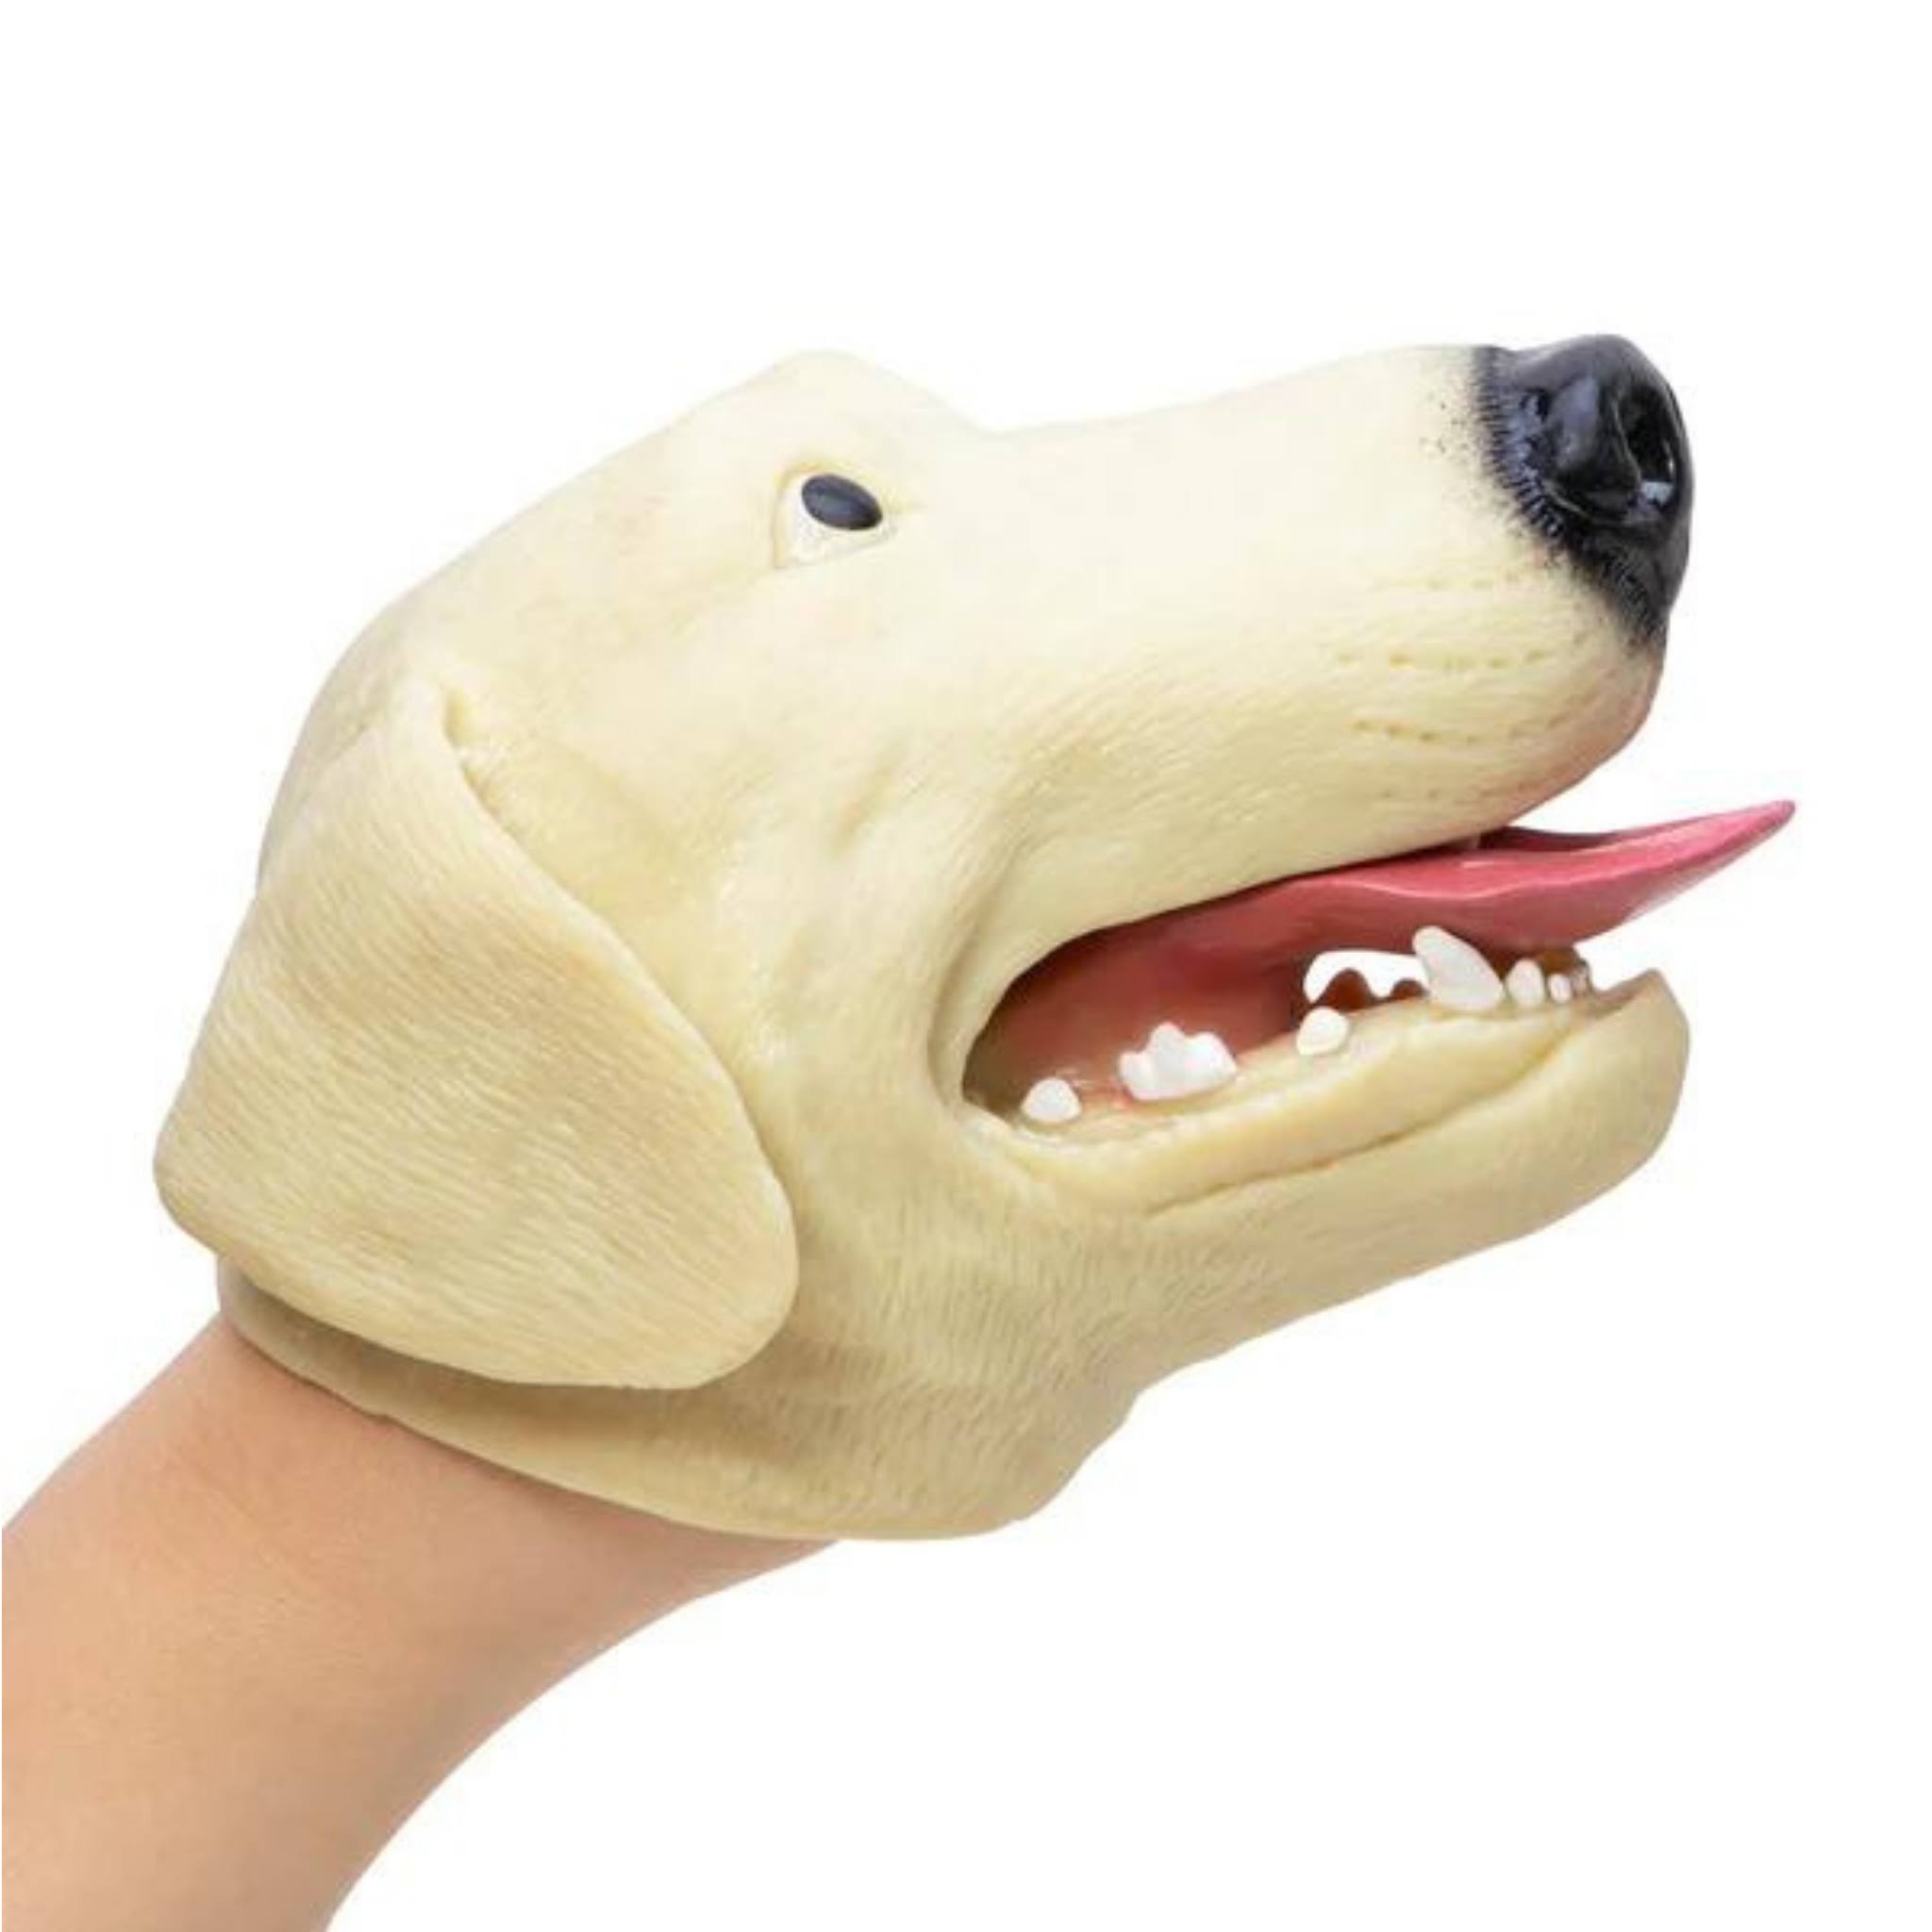 Schylling - Stretchy Dog Hand Puppets